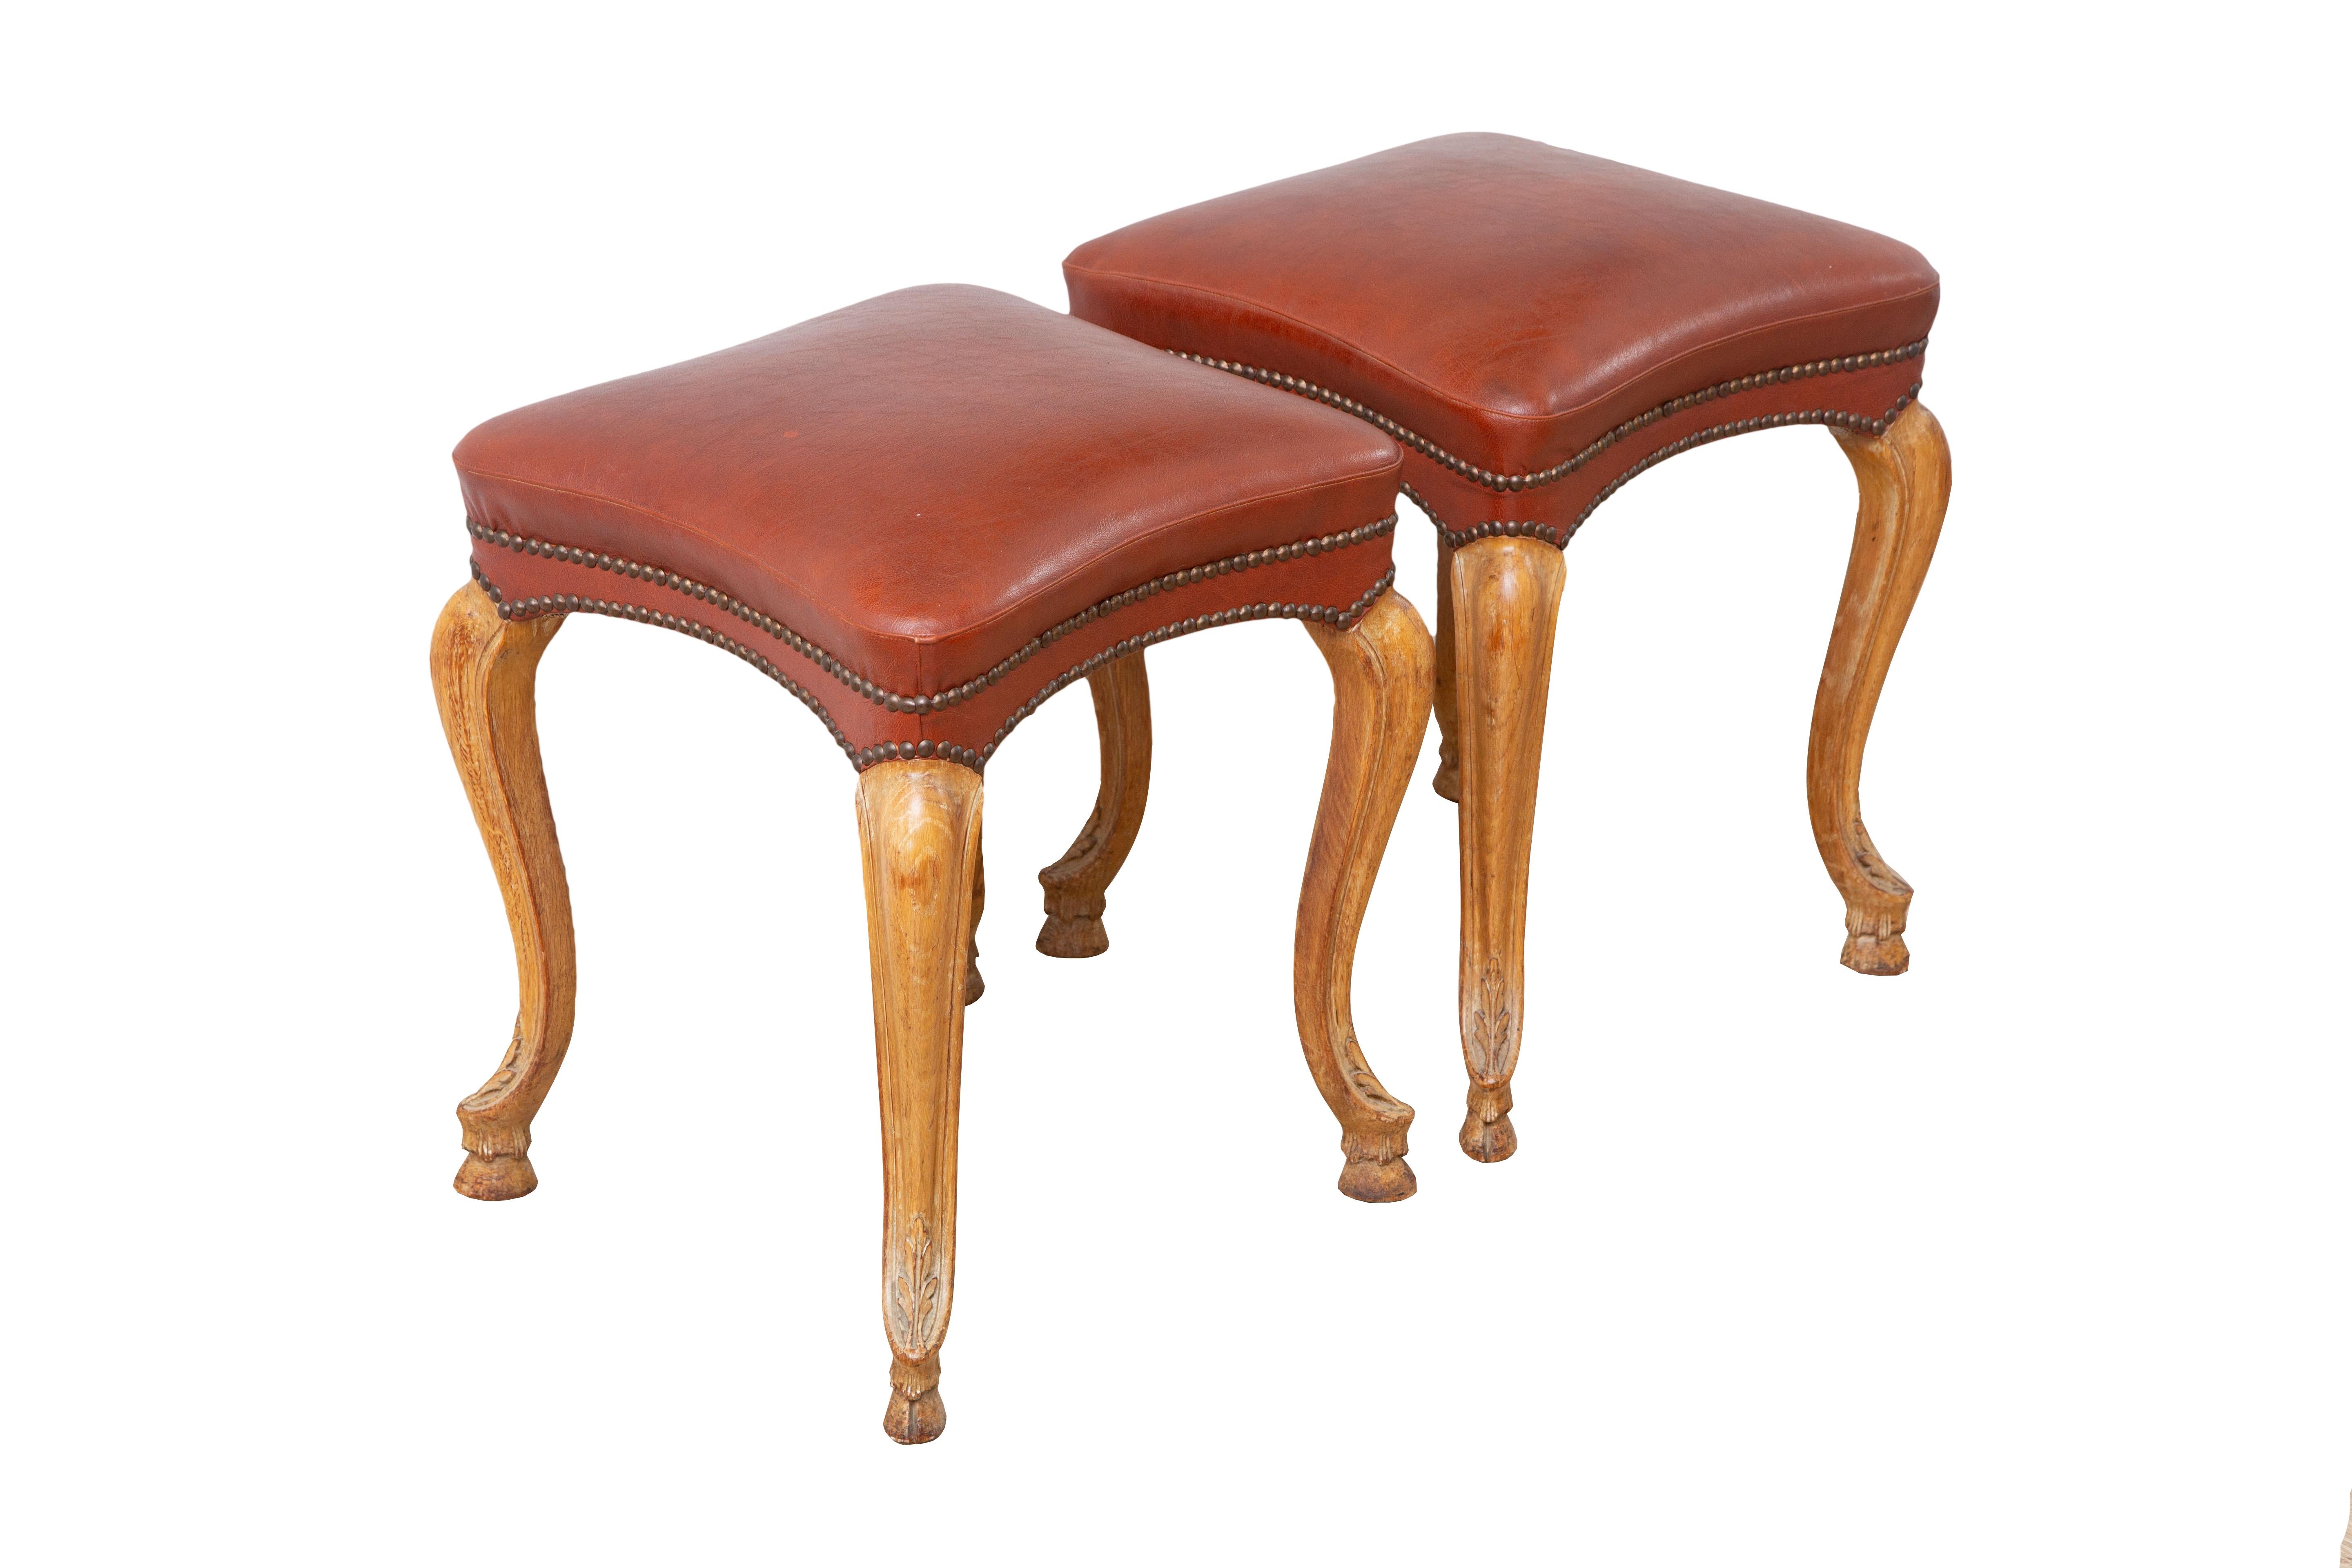 Rare set of four Regence style stackable stools, 
Attributed to Maison Jansen circa 1940. The stools feature beautifully carved walnut cabriole legs terminating in hoof feet. Original Bordeaux leatherette, antique brass nails adorn the hedges.

